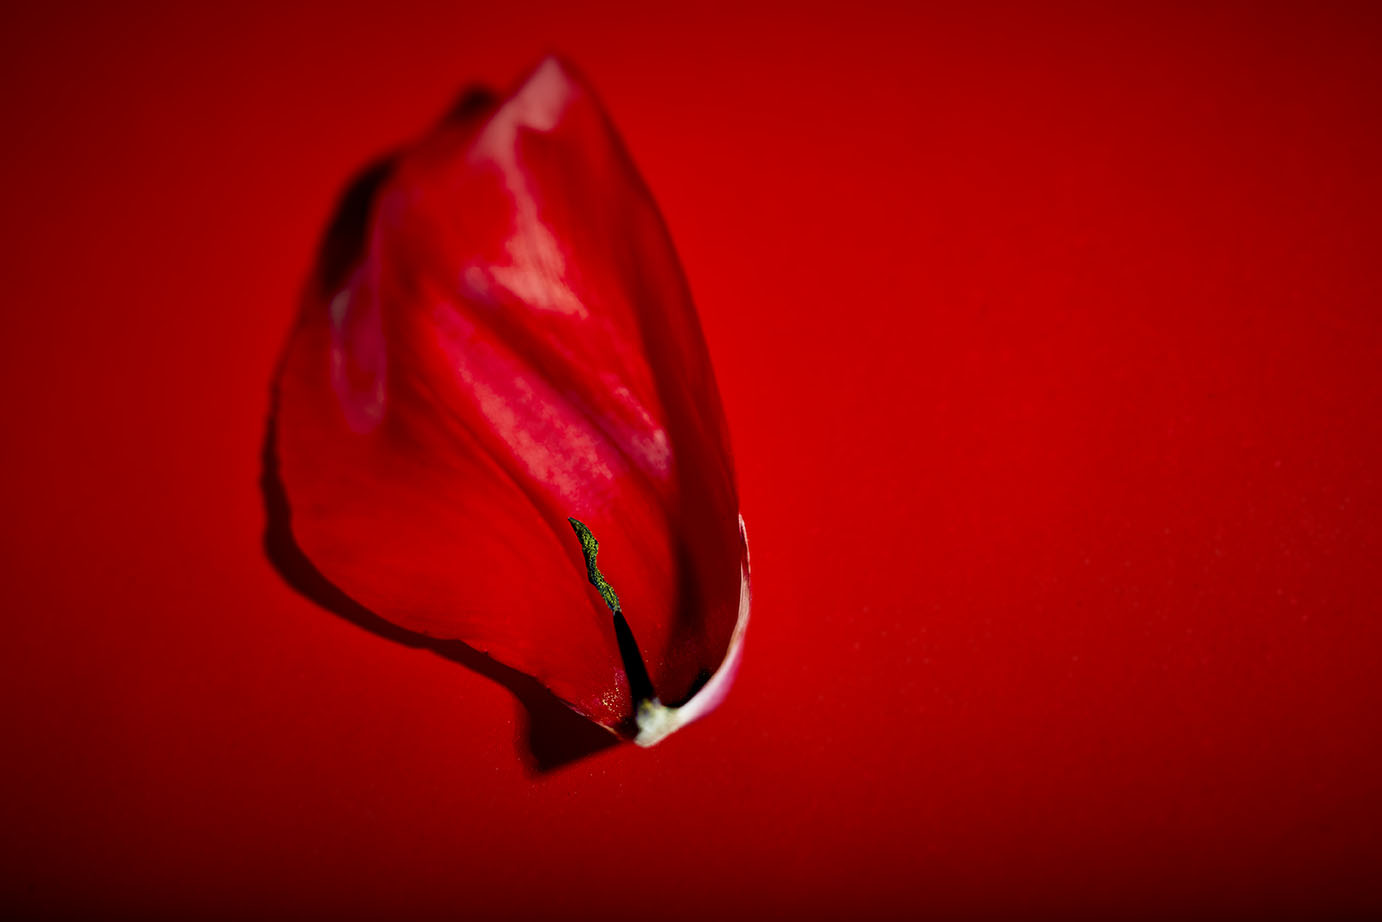 Red on red graphic photograph of a single tulip petal by Randy Allbritton